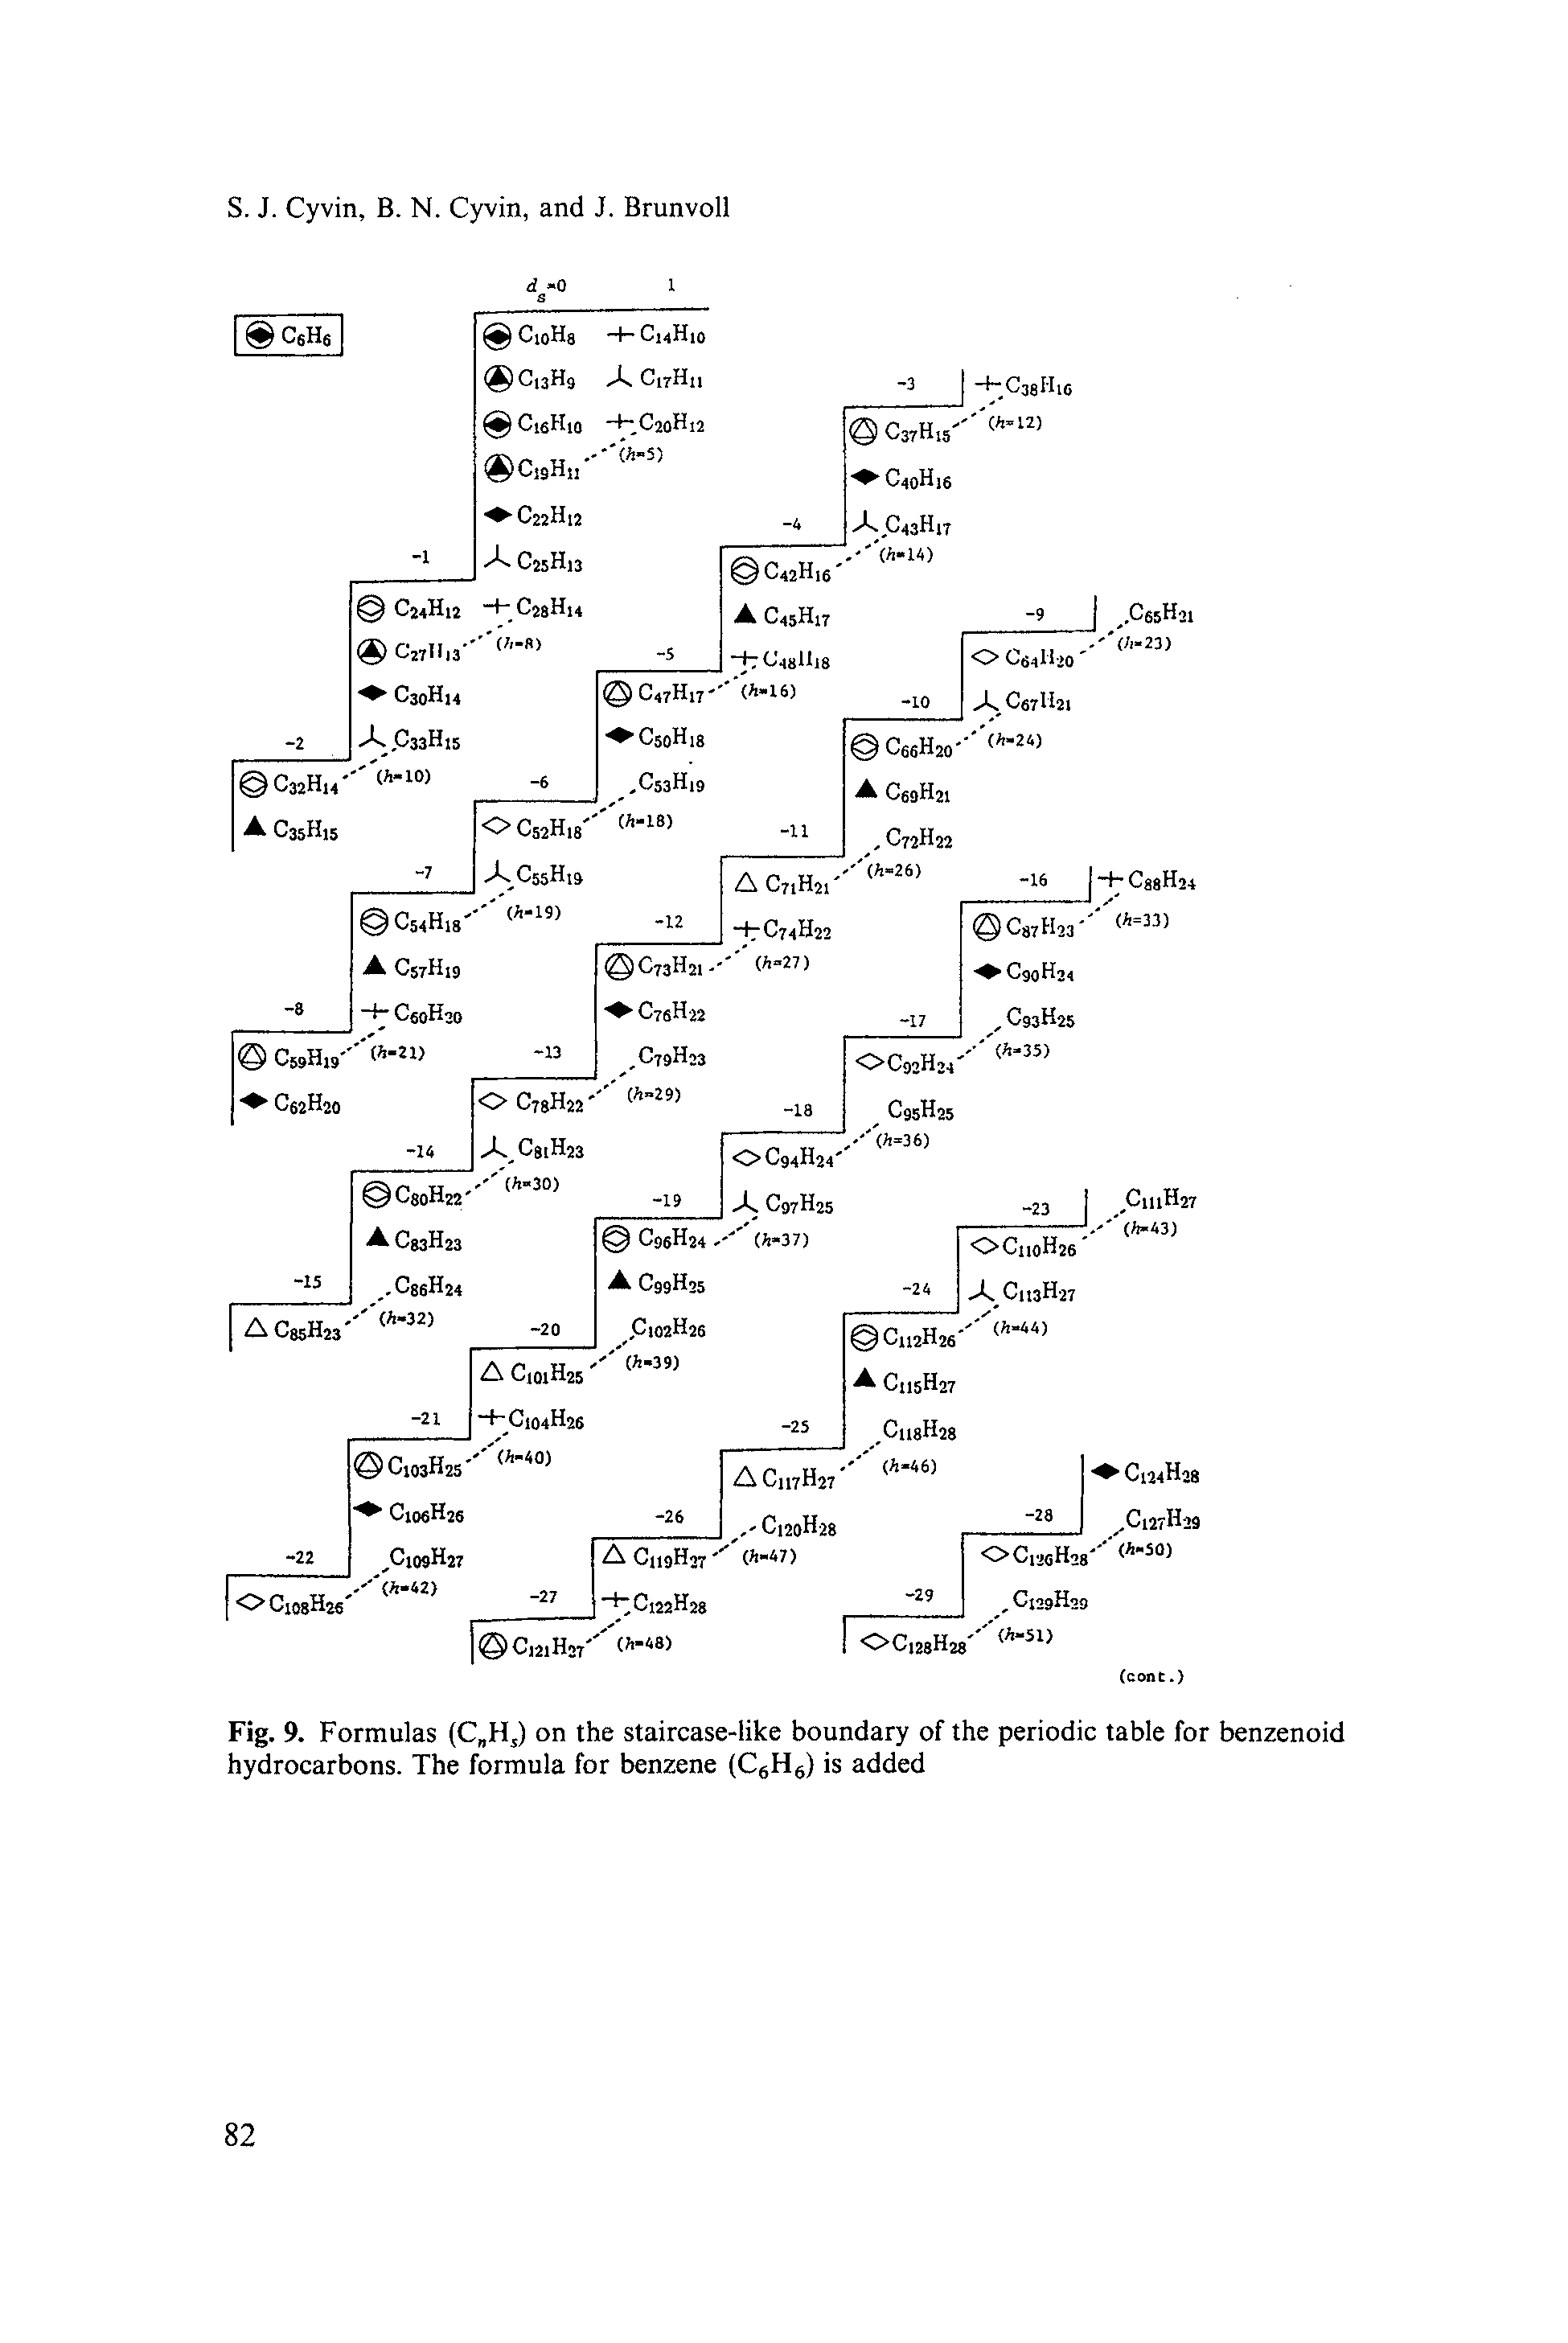 Fig. 9. Formulas (C HS) on the staircase-like boundary of the periodic table for benzenoid hydrocarbons. The formula for benzene (C6H6) is added...